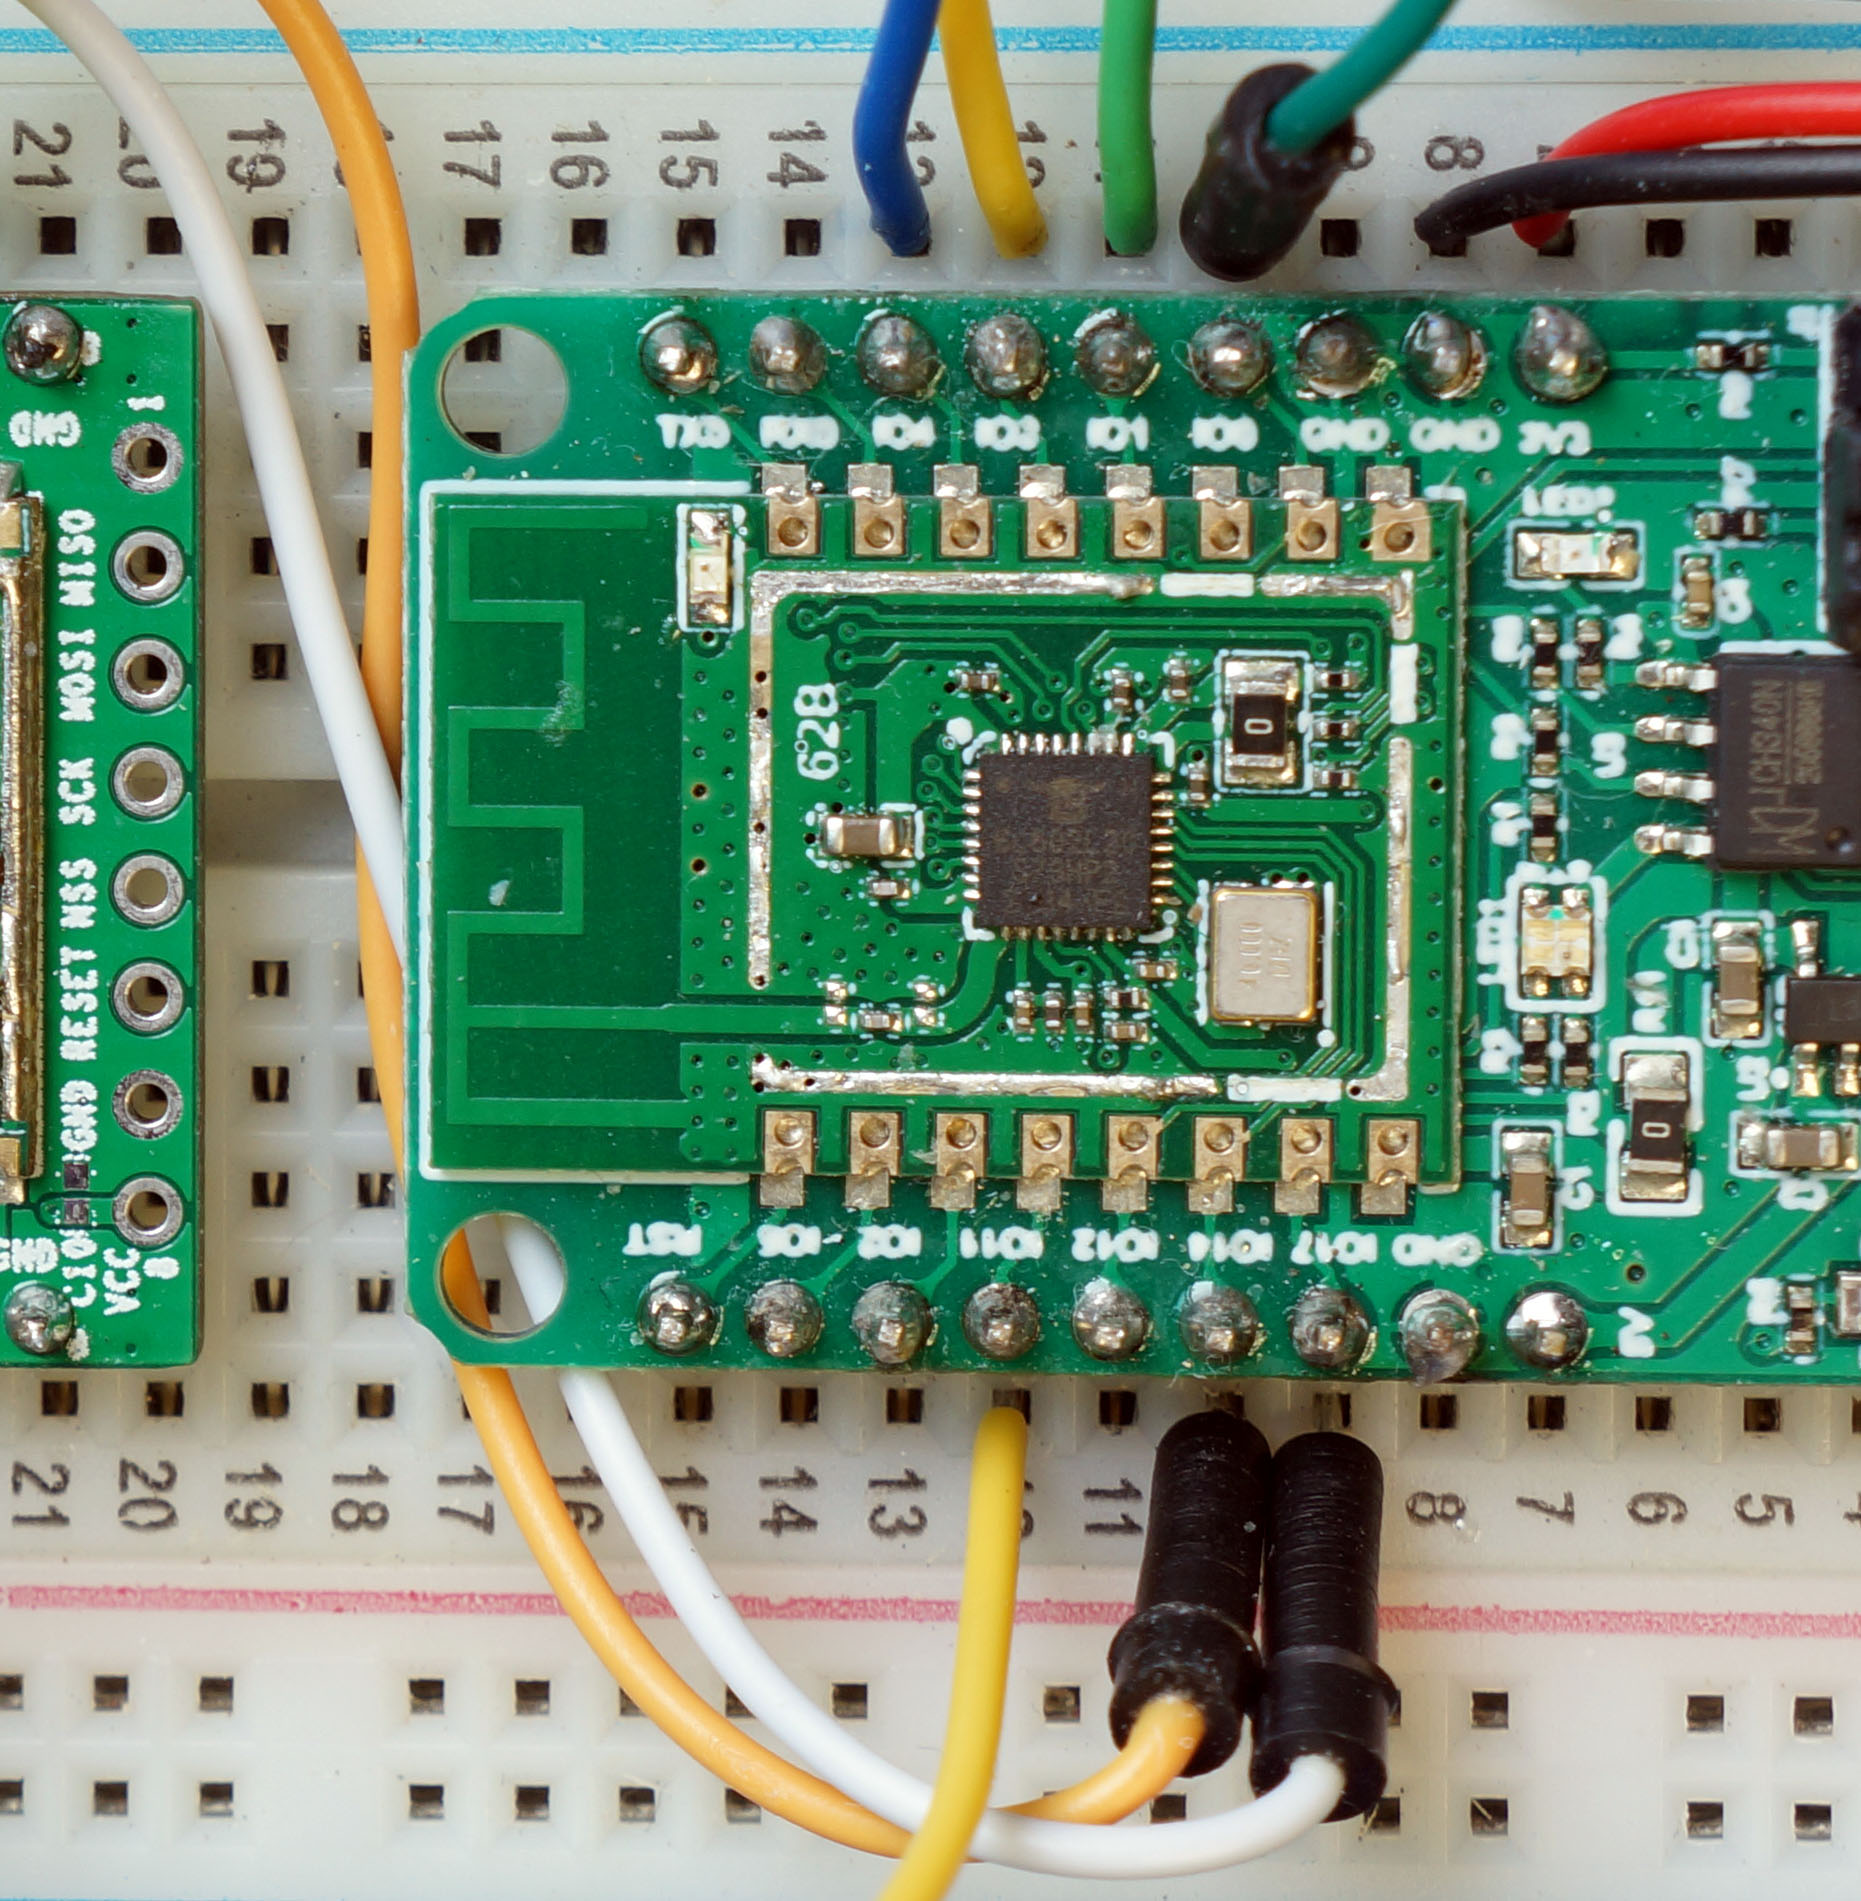 PineCone BL602 RISC-V Board connected to Pine64 RFM90 LoRa Module